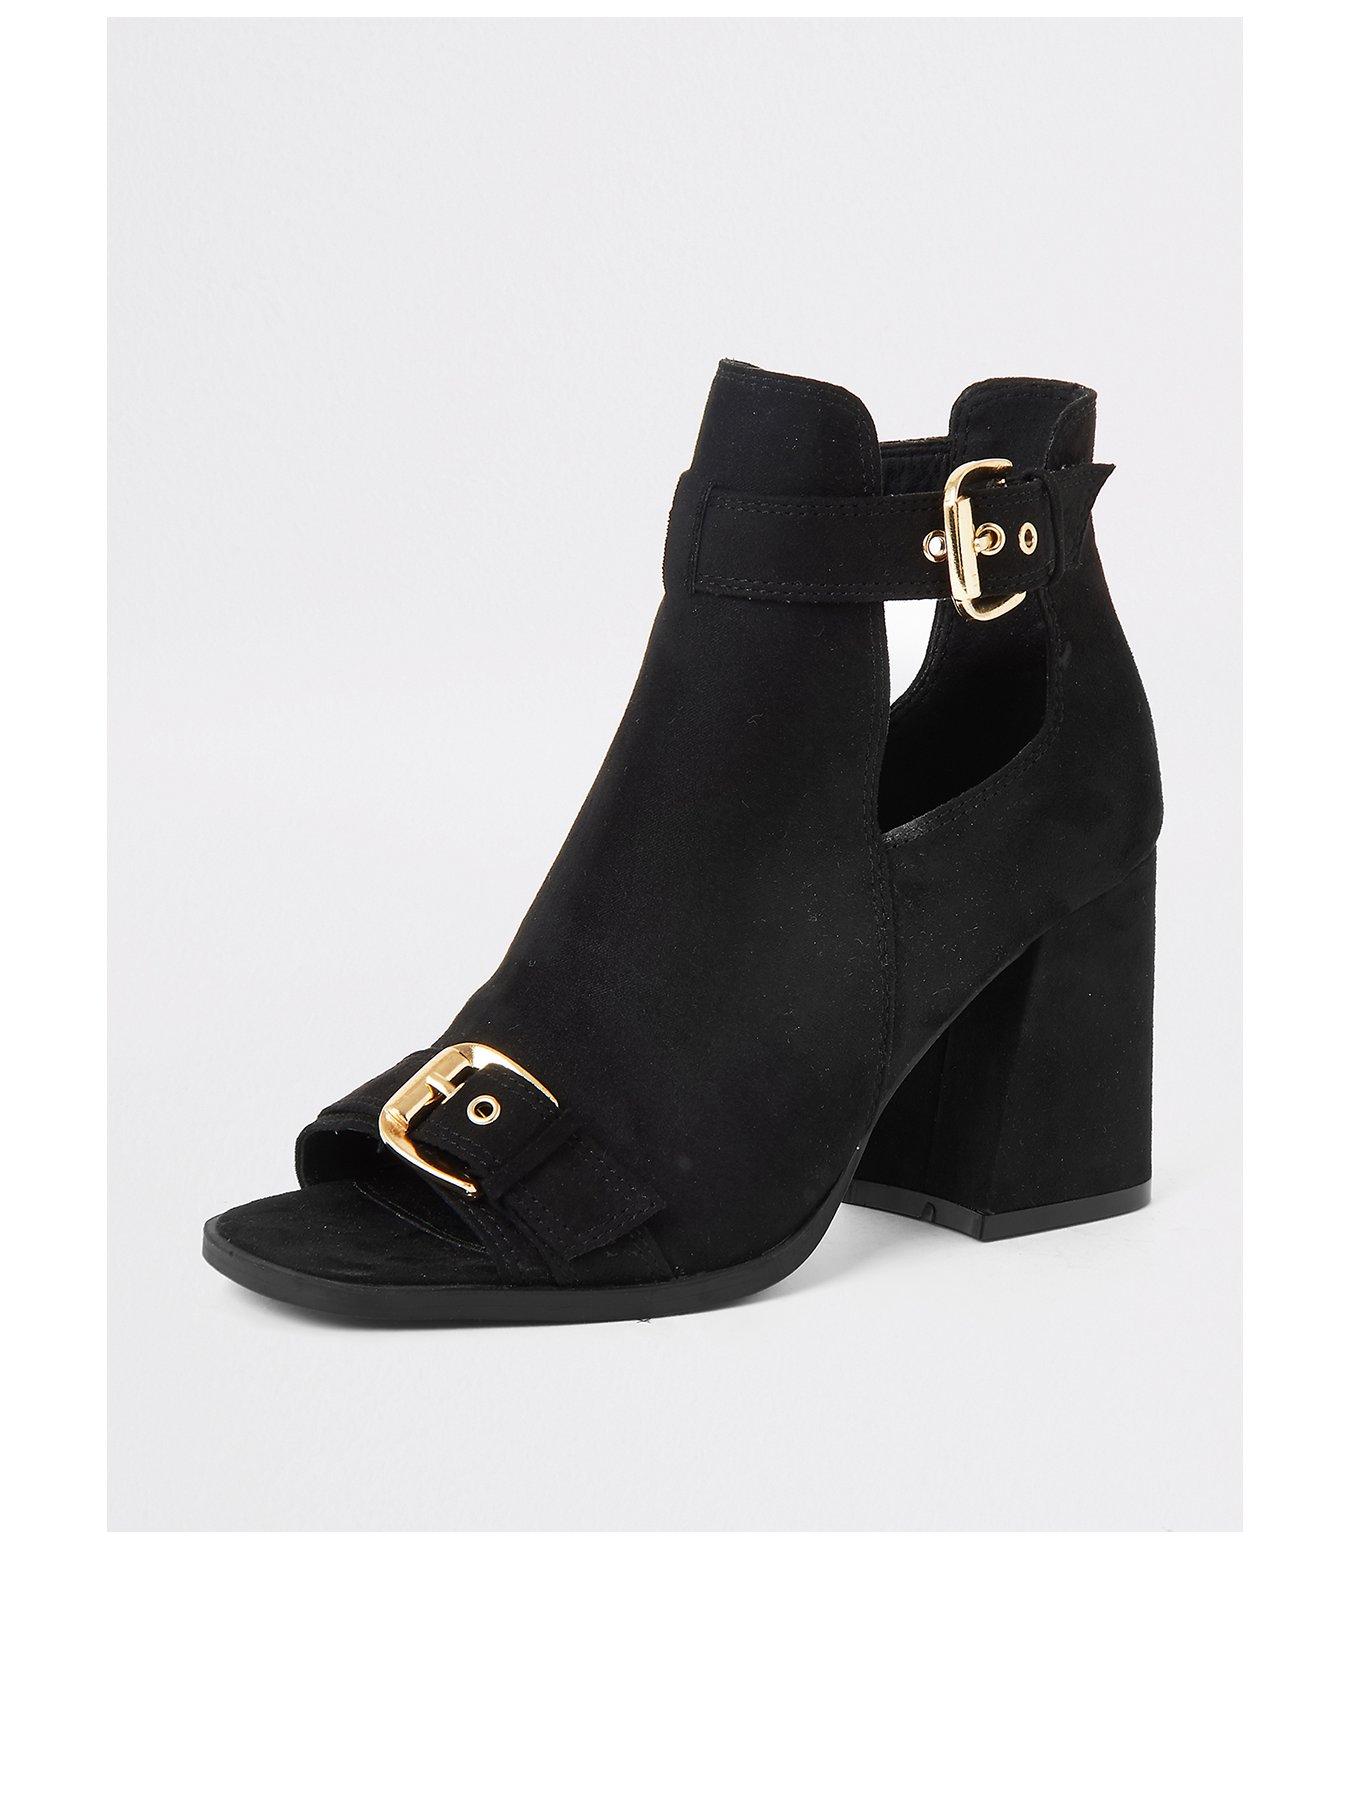 river island buckle boots